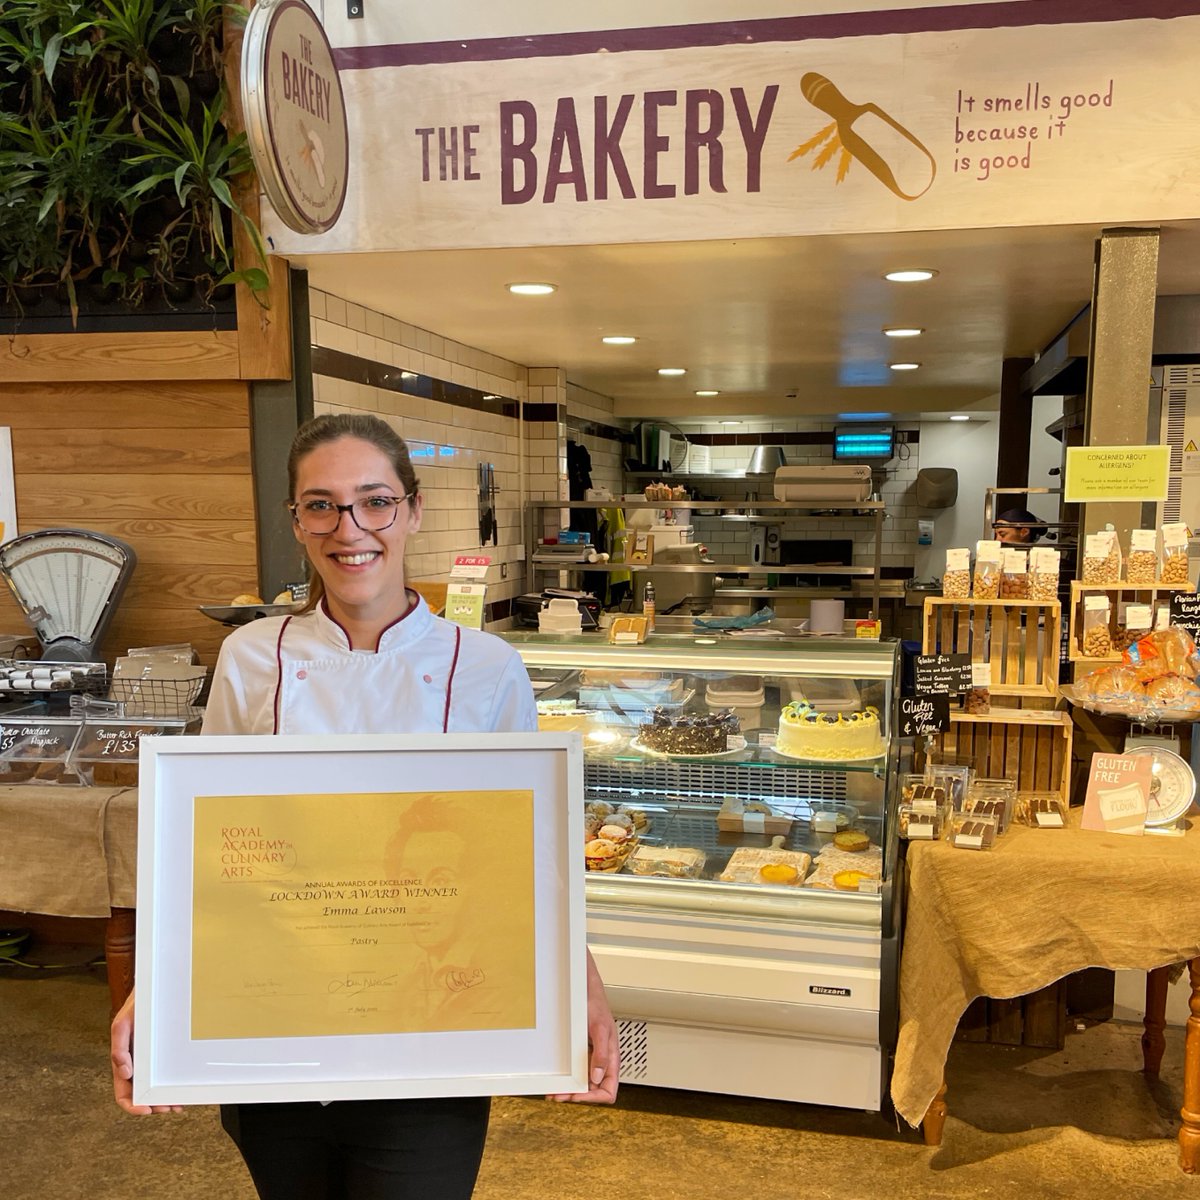 It’s a proud moment for the Keelham family! Emma, our Bakery Manager, had the honour yesterday of attending a gala dinner, hosted by the Royal Academy of Culinary Arts to recognise her award for ‘Pastry Chef of the Year 2021’. A massive congratulations! ✨